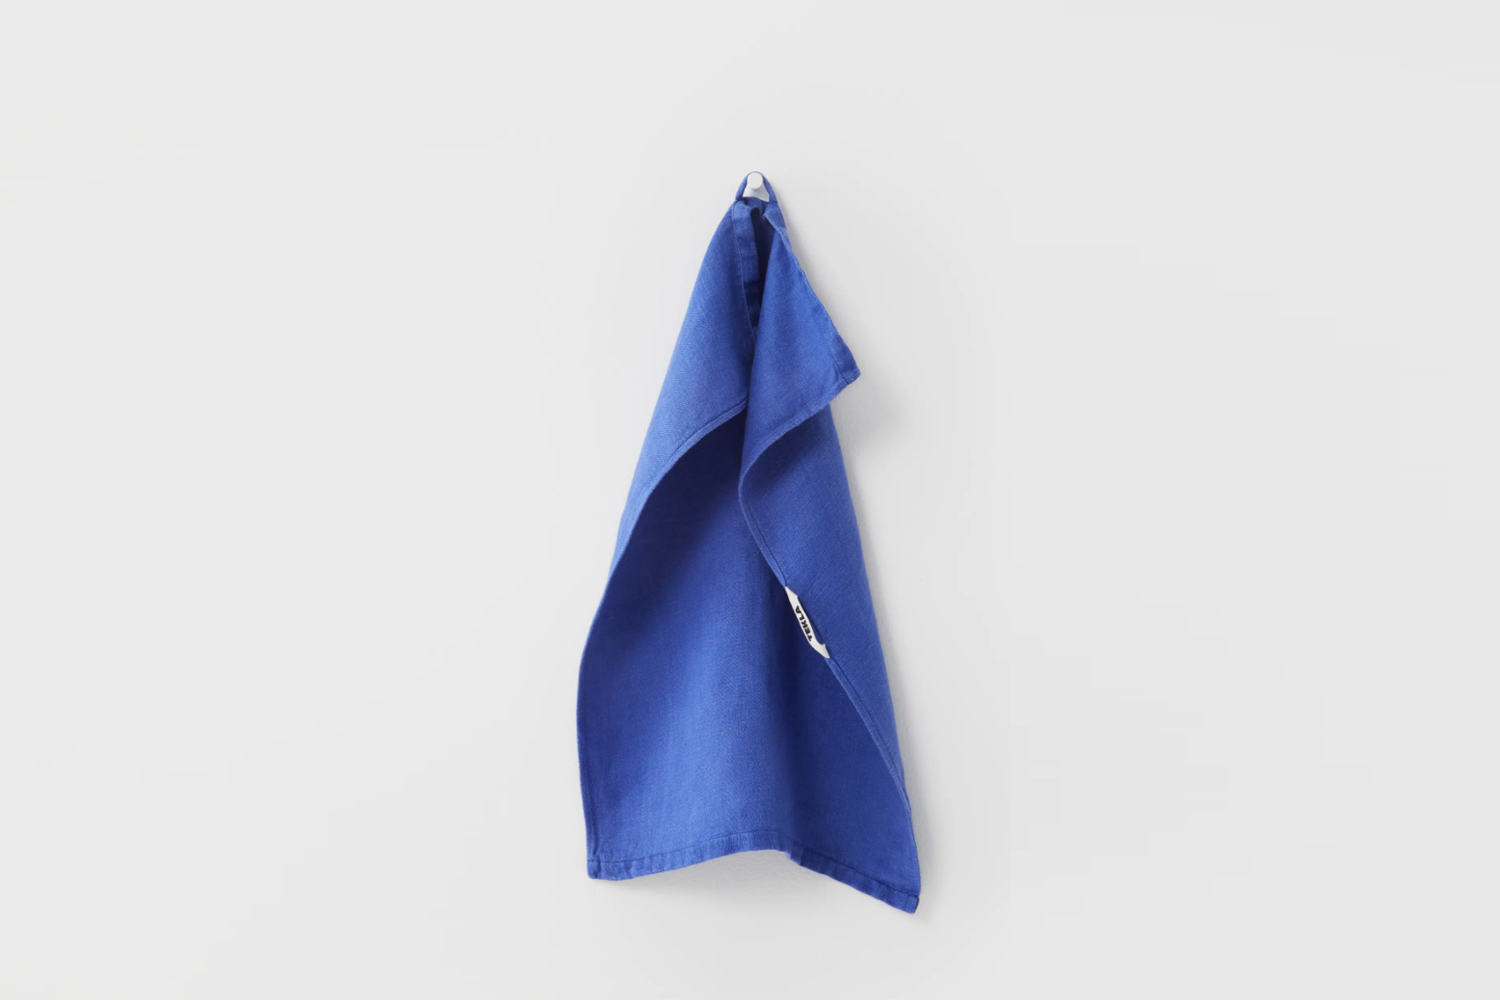 the linen tekla kitchen towel in stain, a deep blue color, is . 23